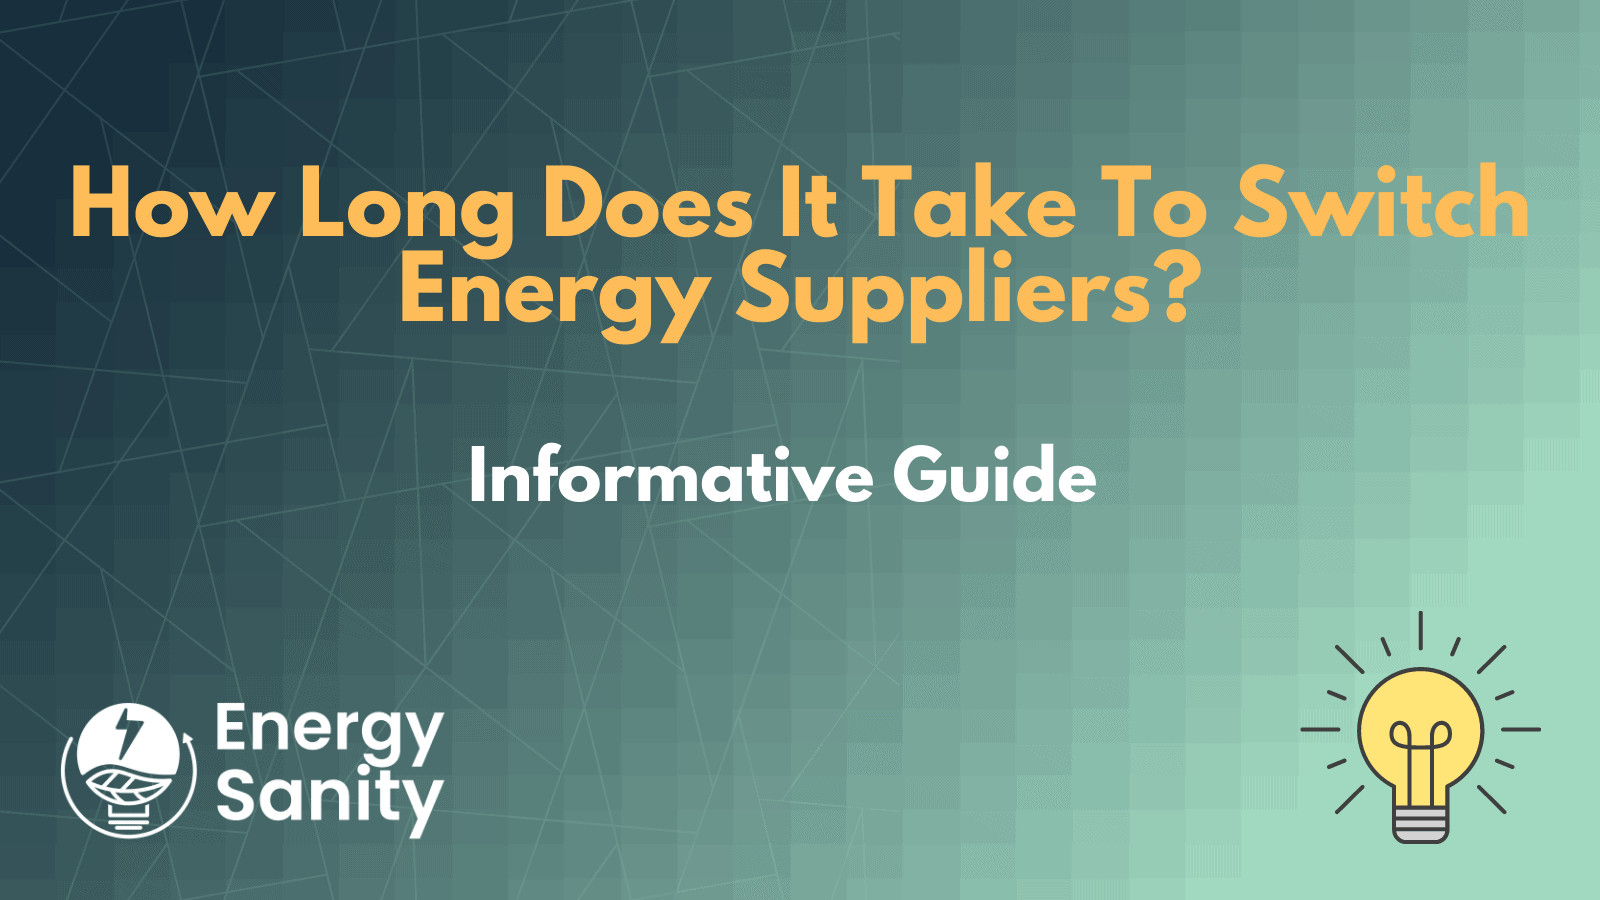 How Long Does It Take To Switch Energy Suppliers? - Energysanity